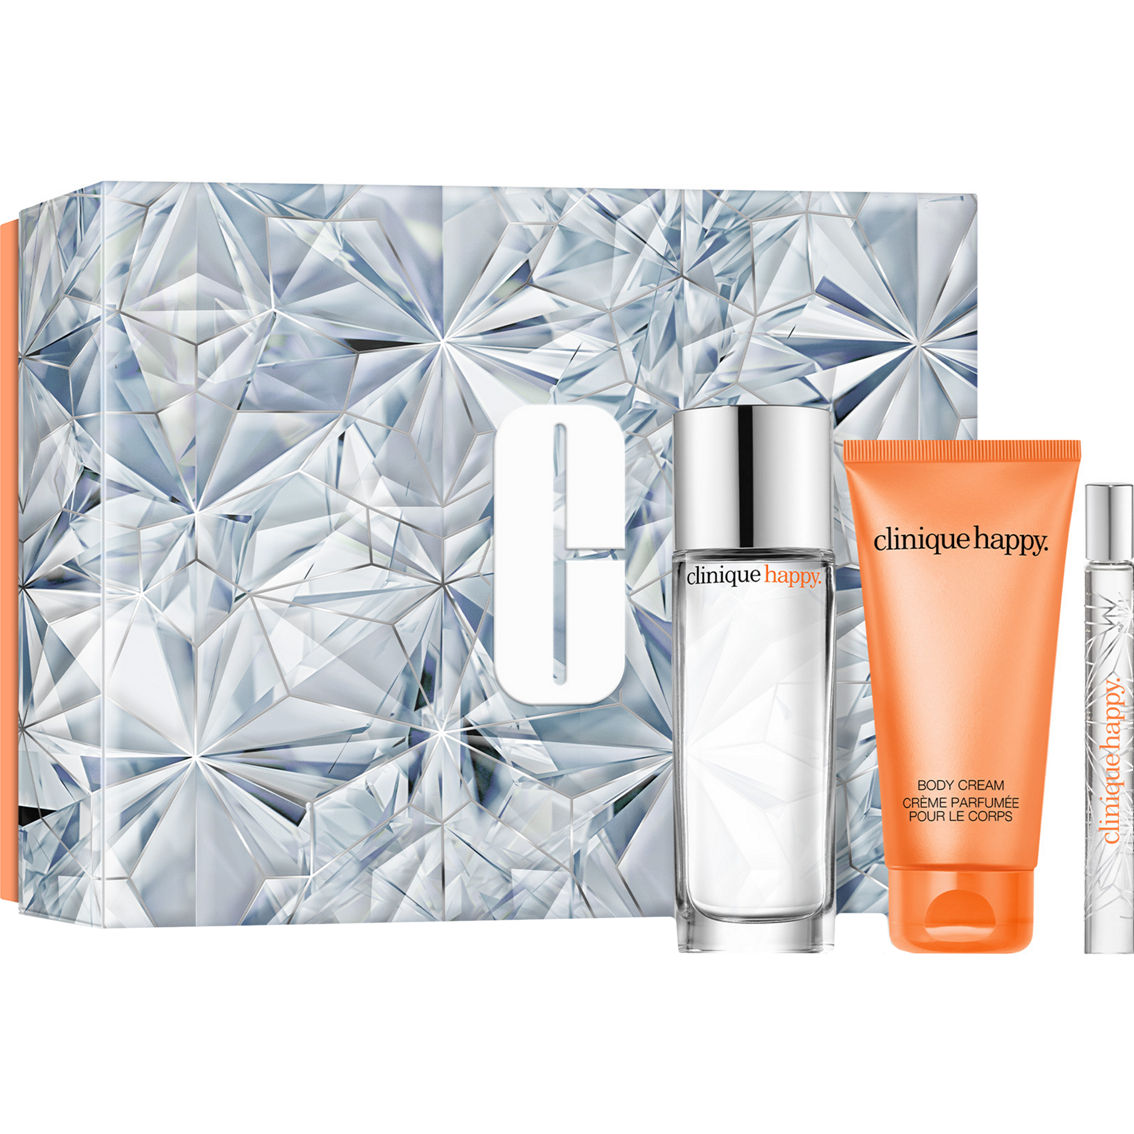 Clinique Perfectly Happy Fragrance 3 pc. Set - Image 1 of 4